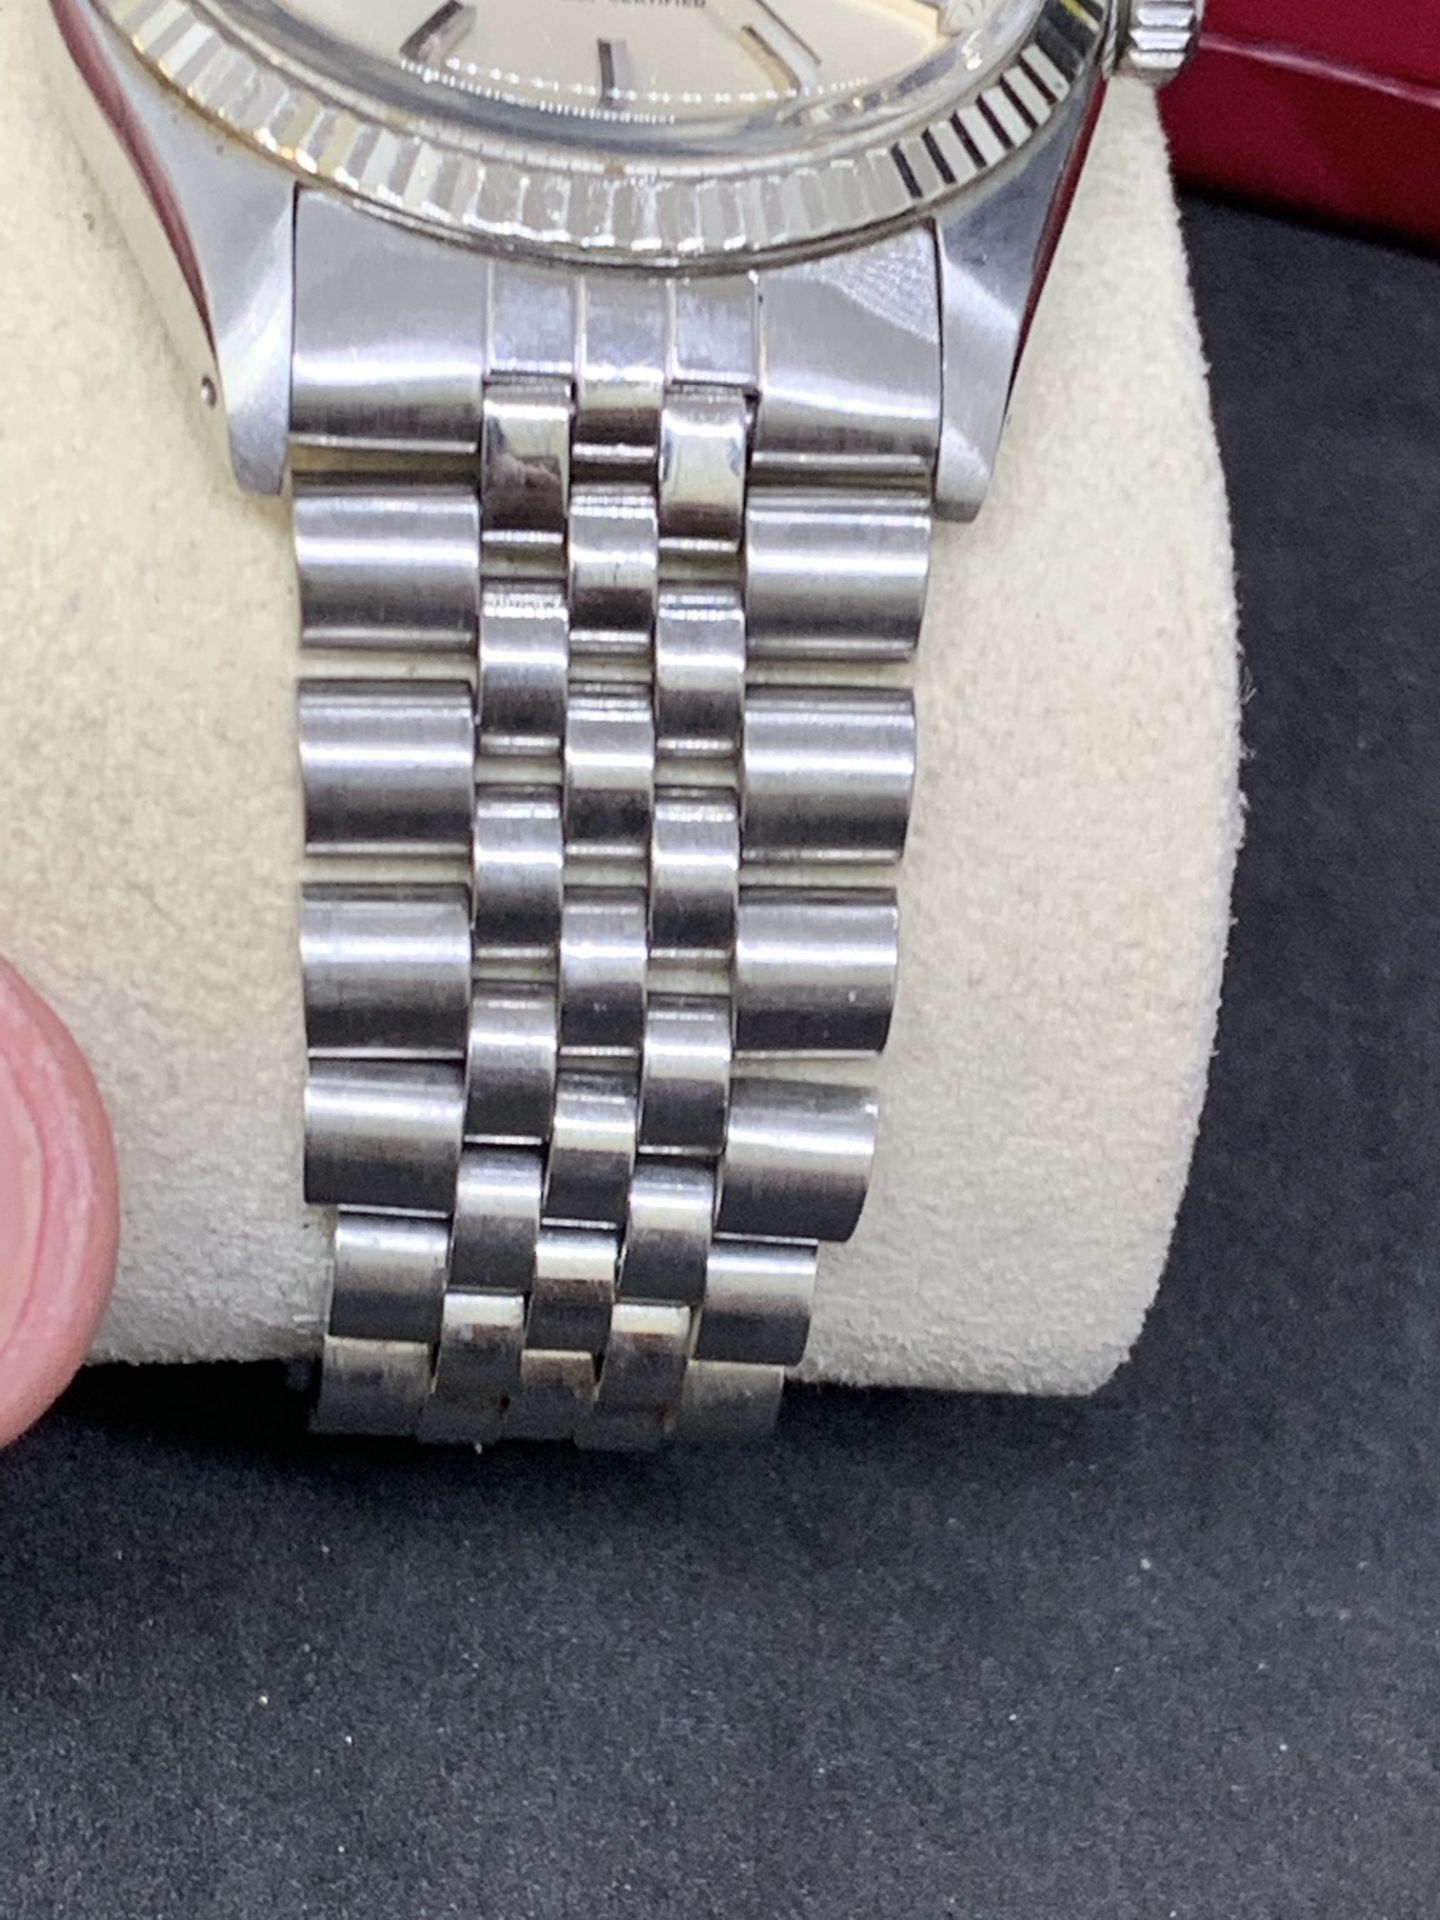 ROLEX DATEJUST WHITE GOLD & STAINLESS STEEL WATCH - APPROX 1980's - Image 3 of 8